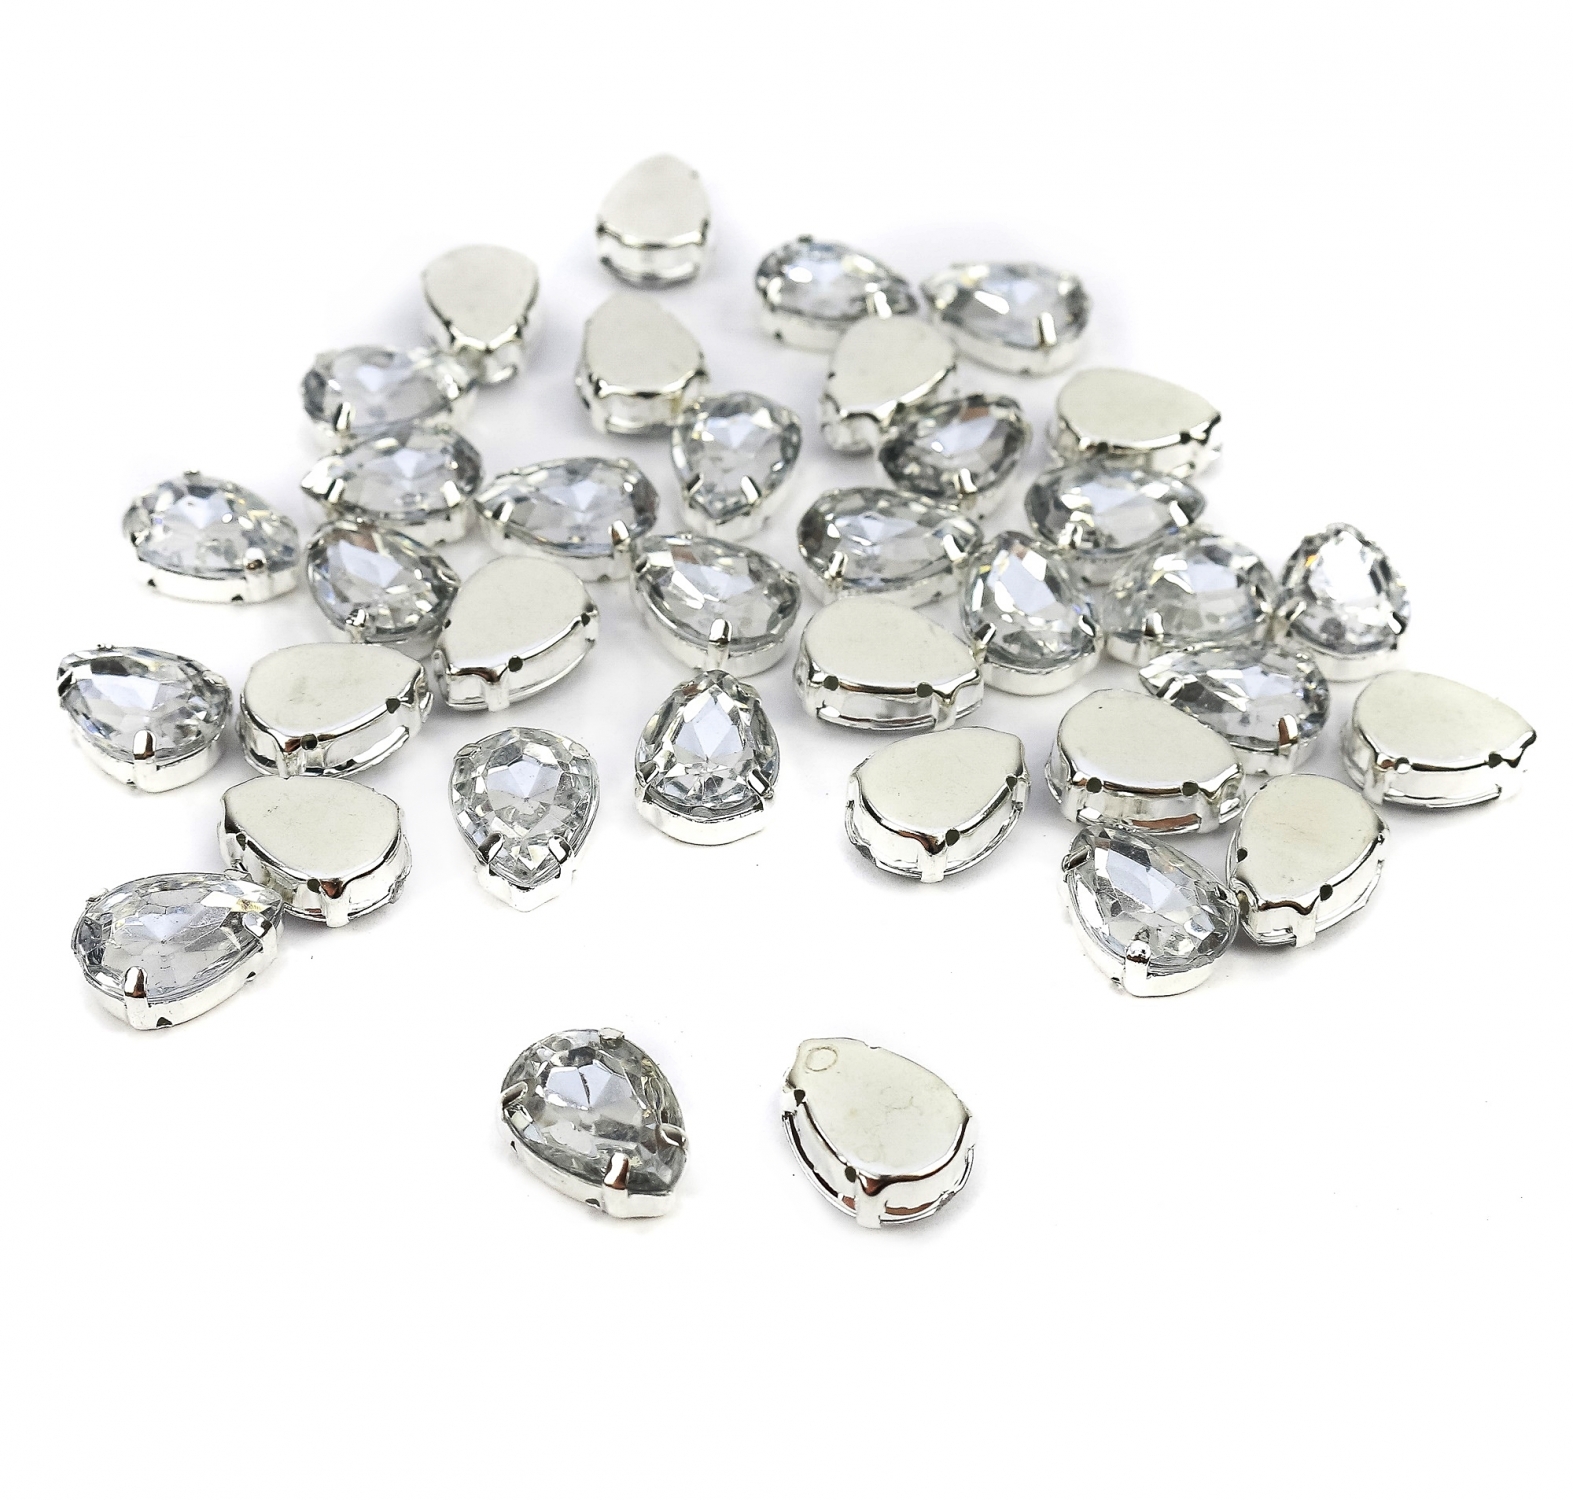 Sew-on Crystals, Size 13x18 mm (100 pcs/pack)ode: R11783